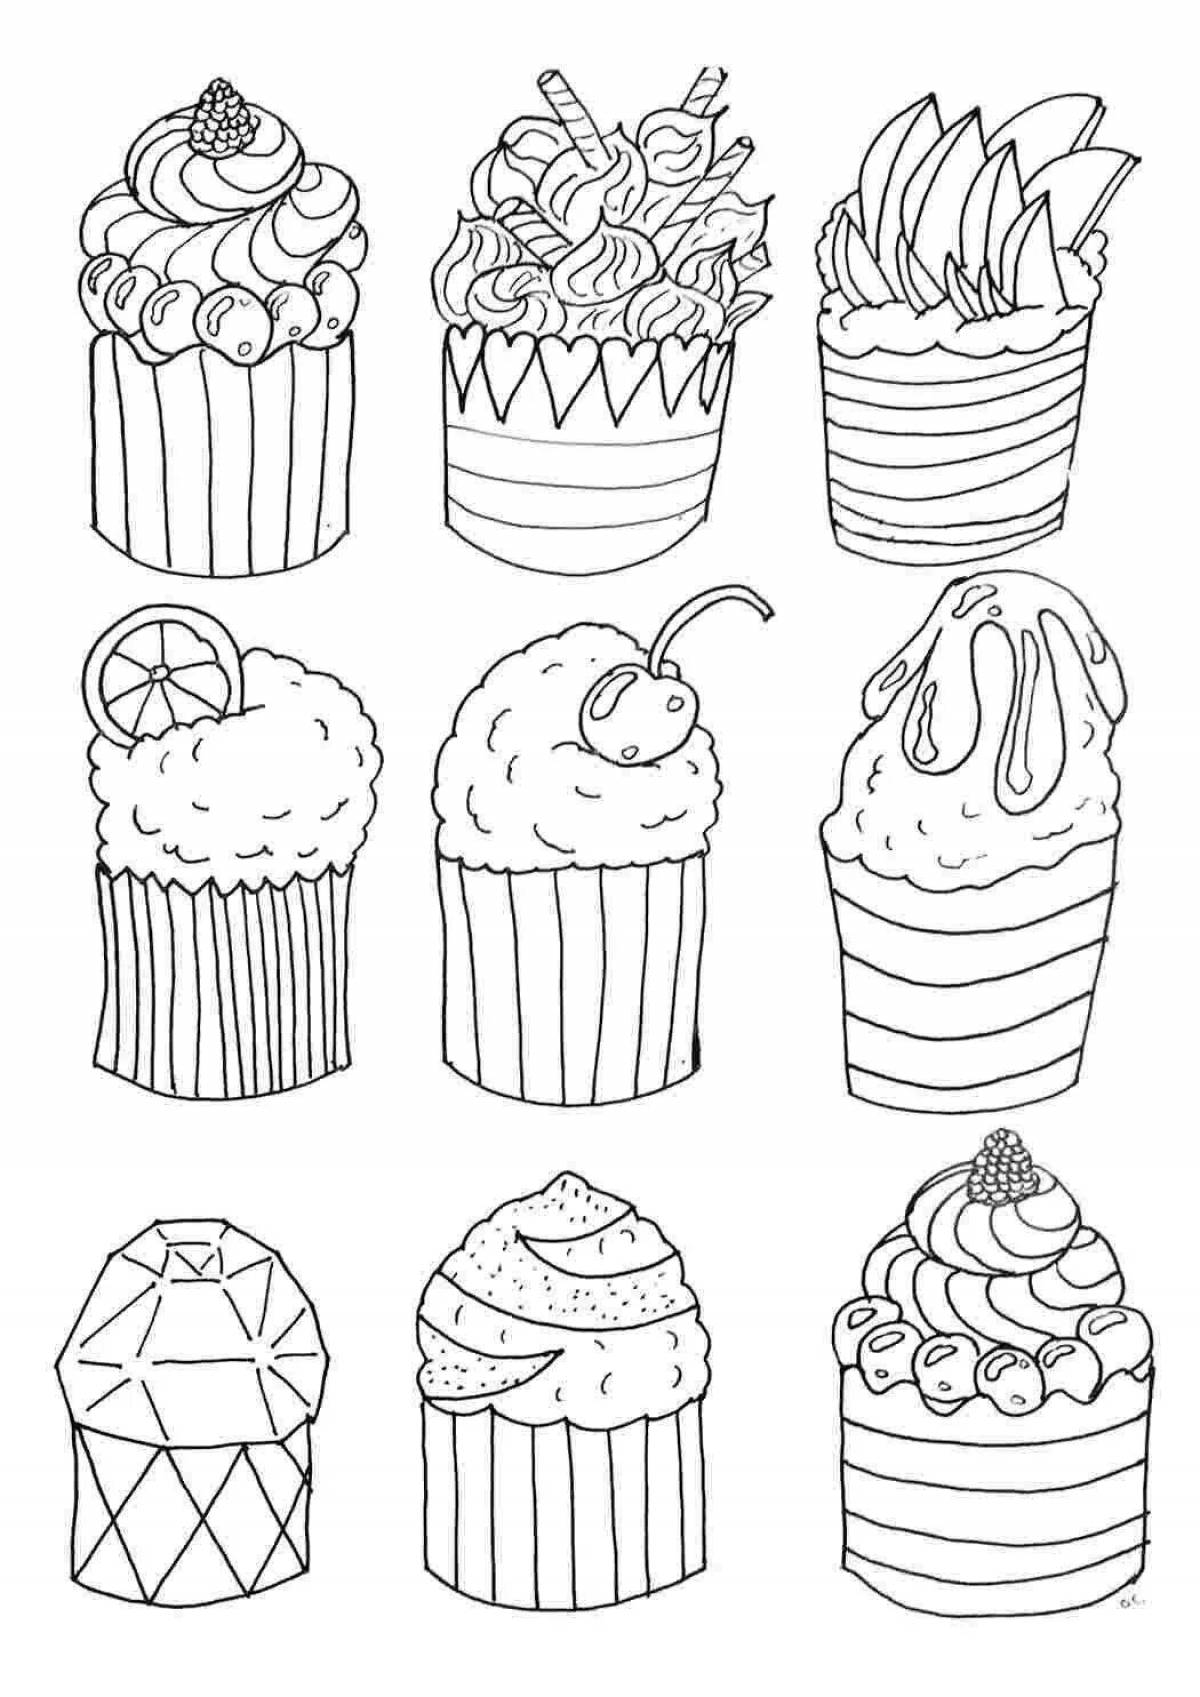 Coloring book lovely cupcake